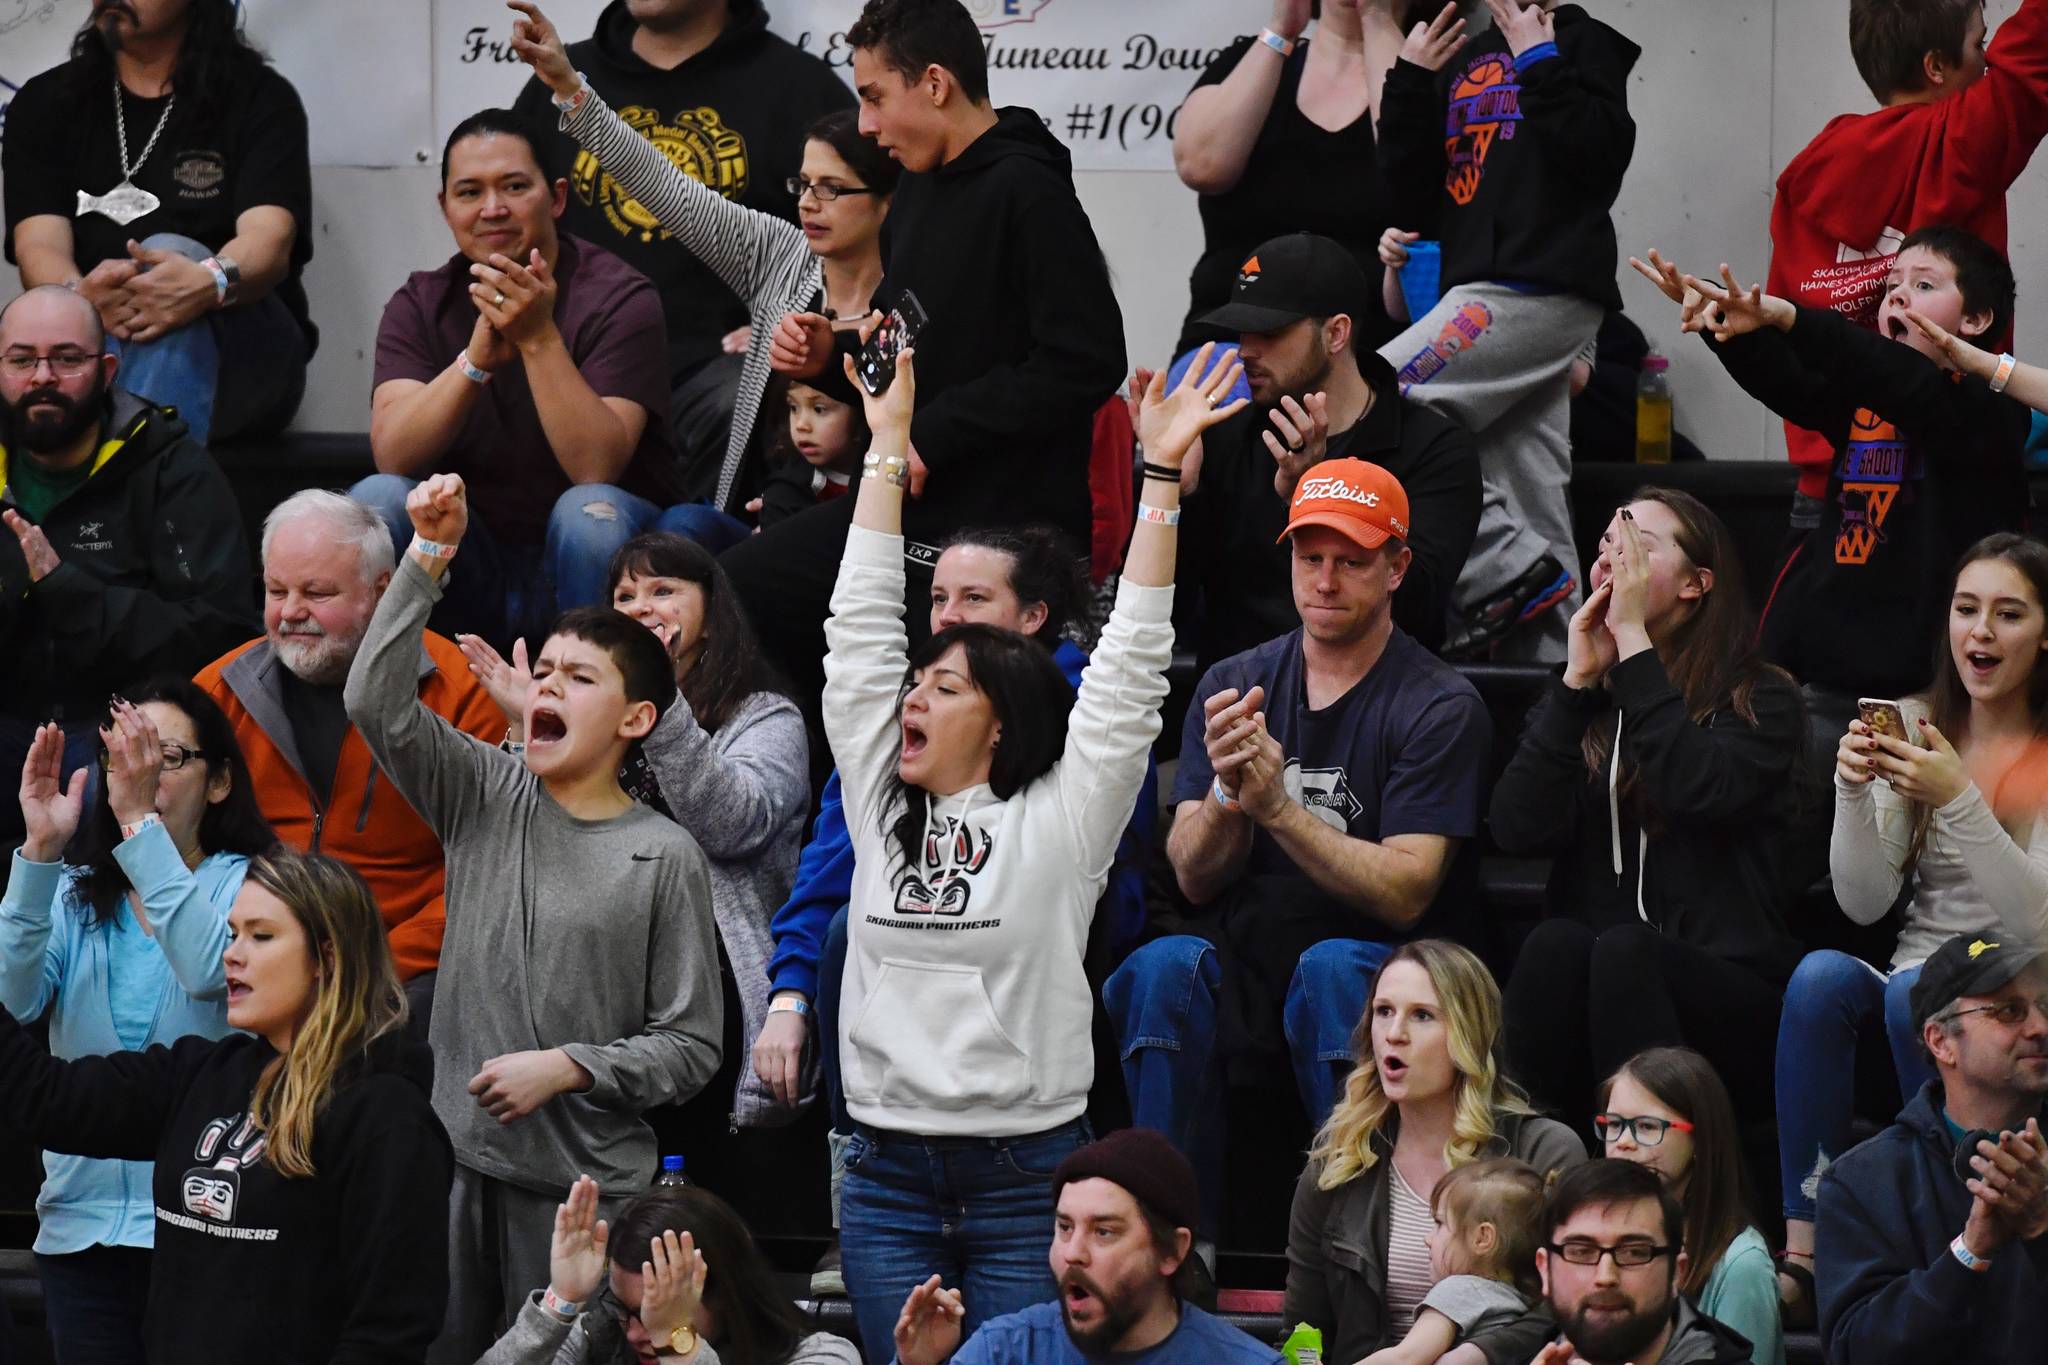 Skagway fans cheer on their women’s team against Haines in the women’s final at the Gold Medal Basketball Tournament on Saturday, March 23, 2019. (Michael Penn | Juneau Empire)